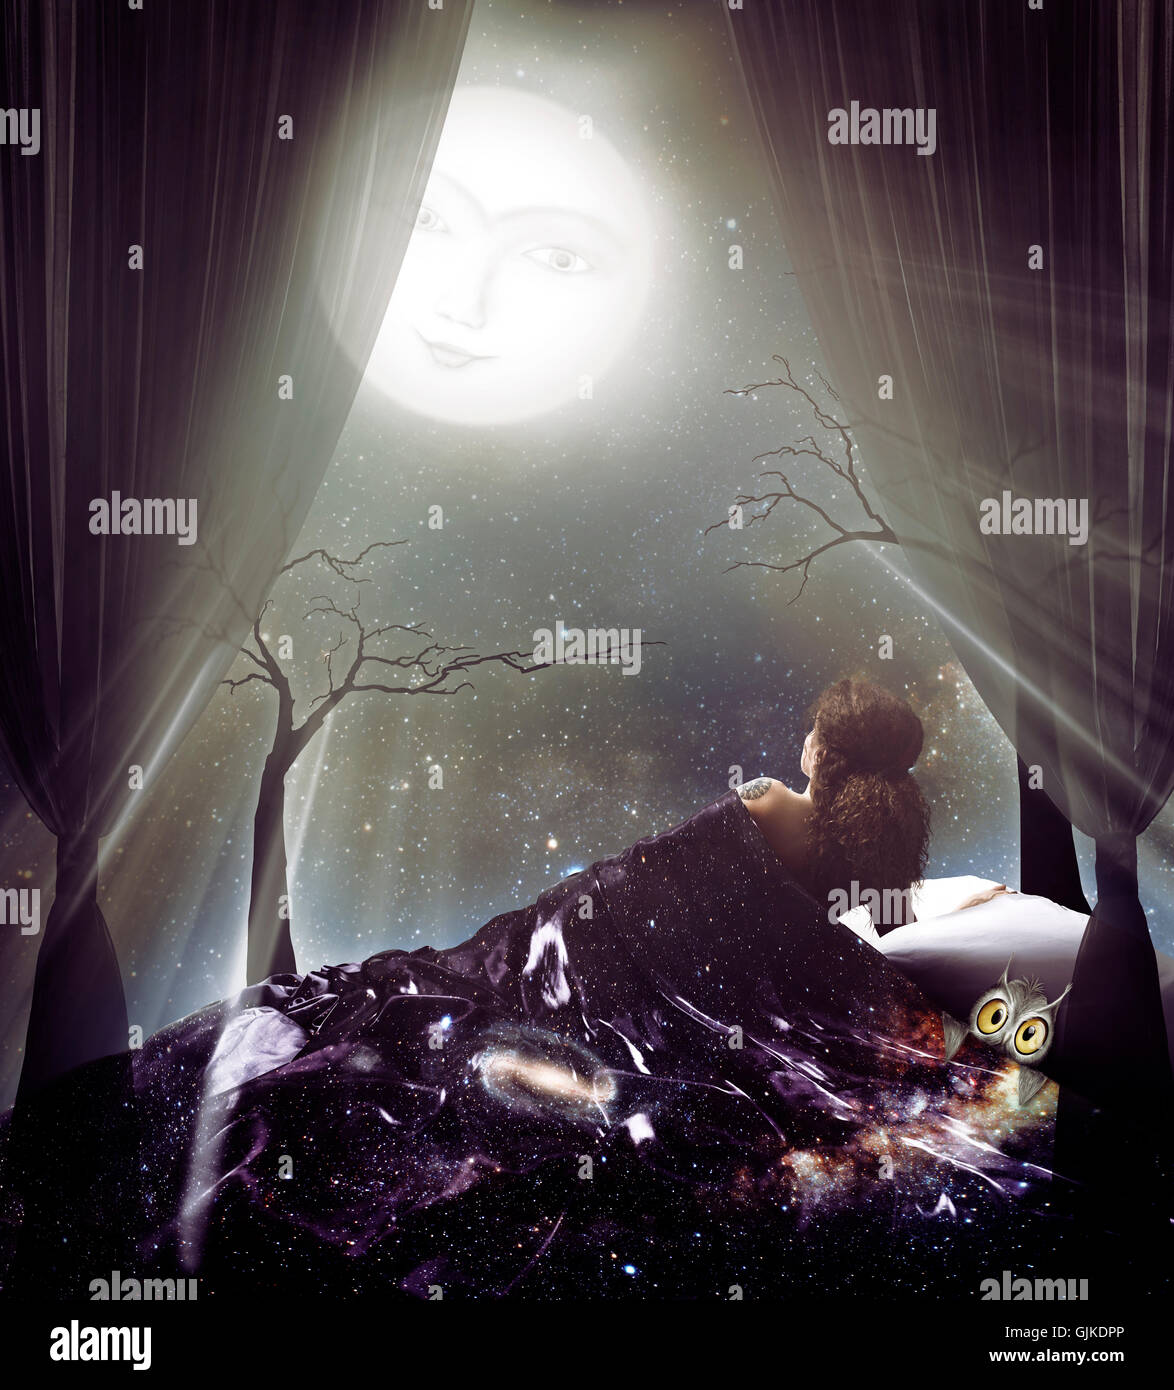 Lit by the moonlight woman under the starry sky blanket with an owl under the full moon artistic spiritual photo illustration Stock Photo